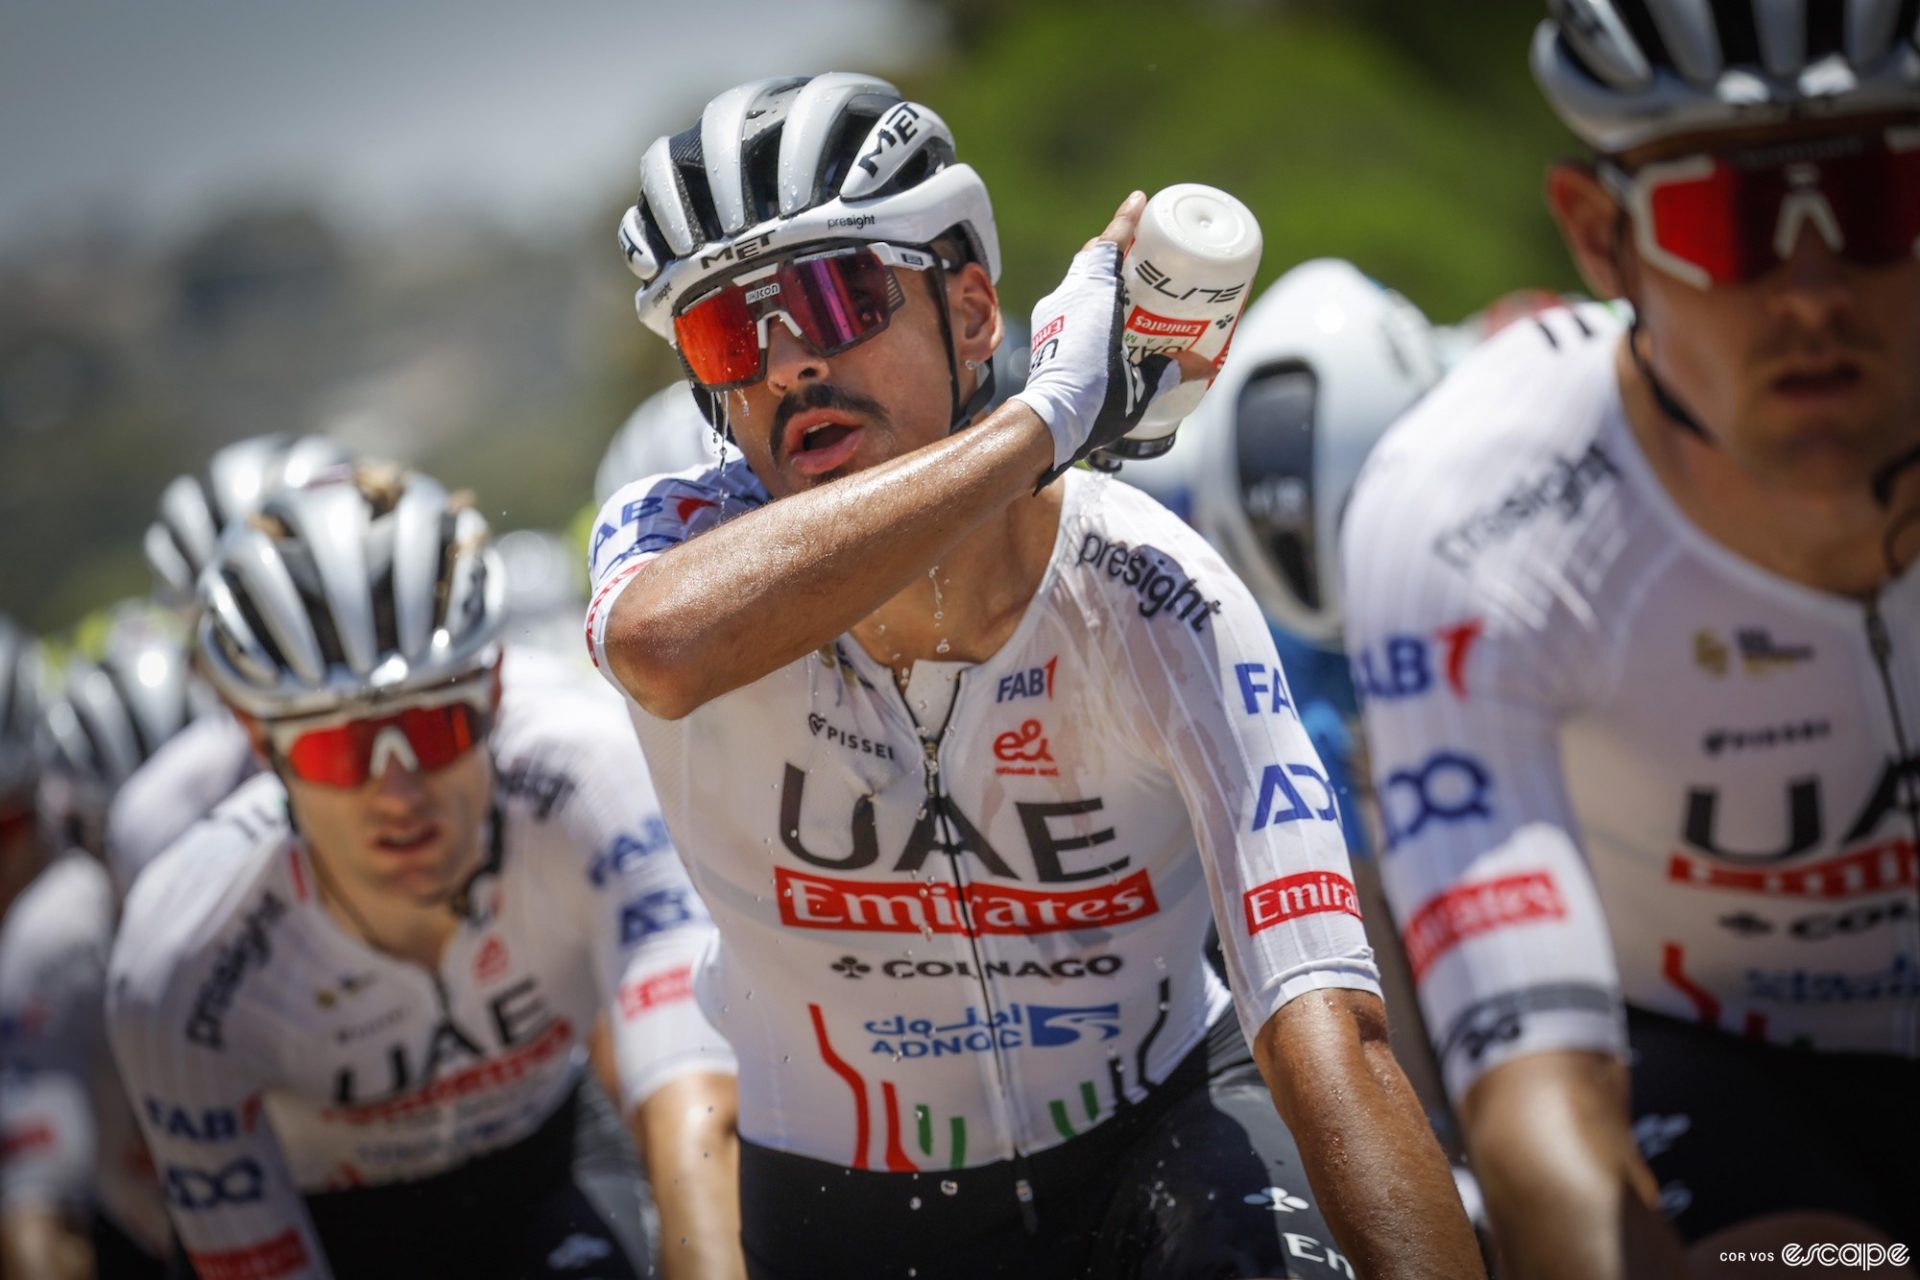 António Morgado douses himself with water at the Tour Down Under.